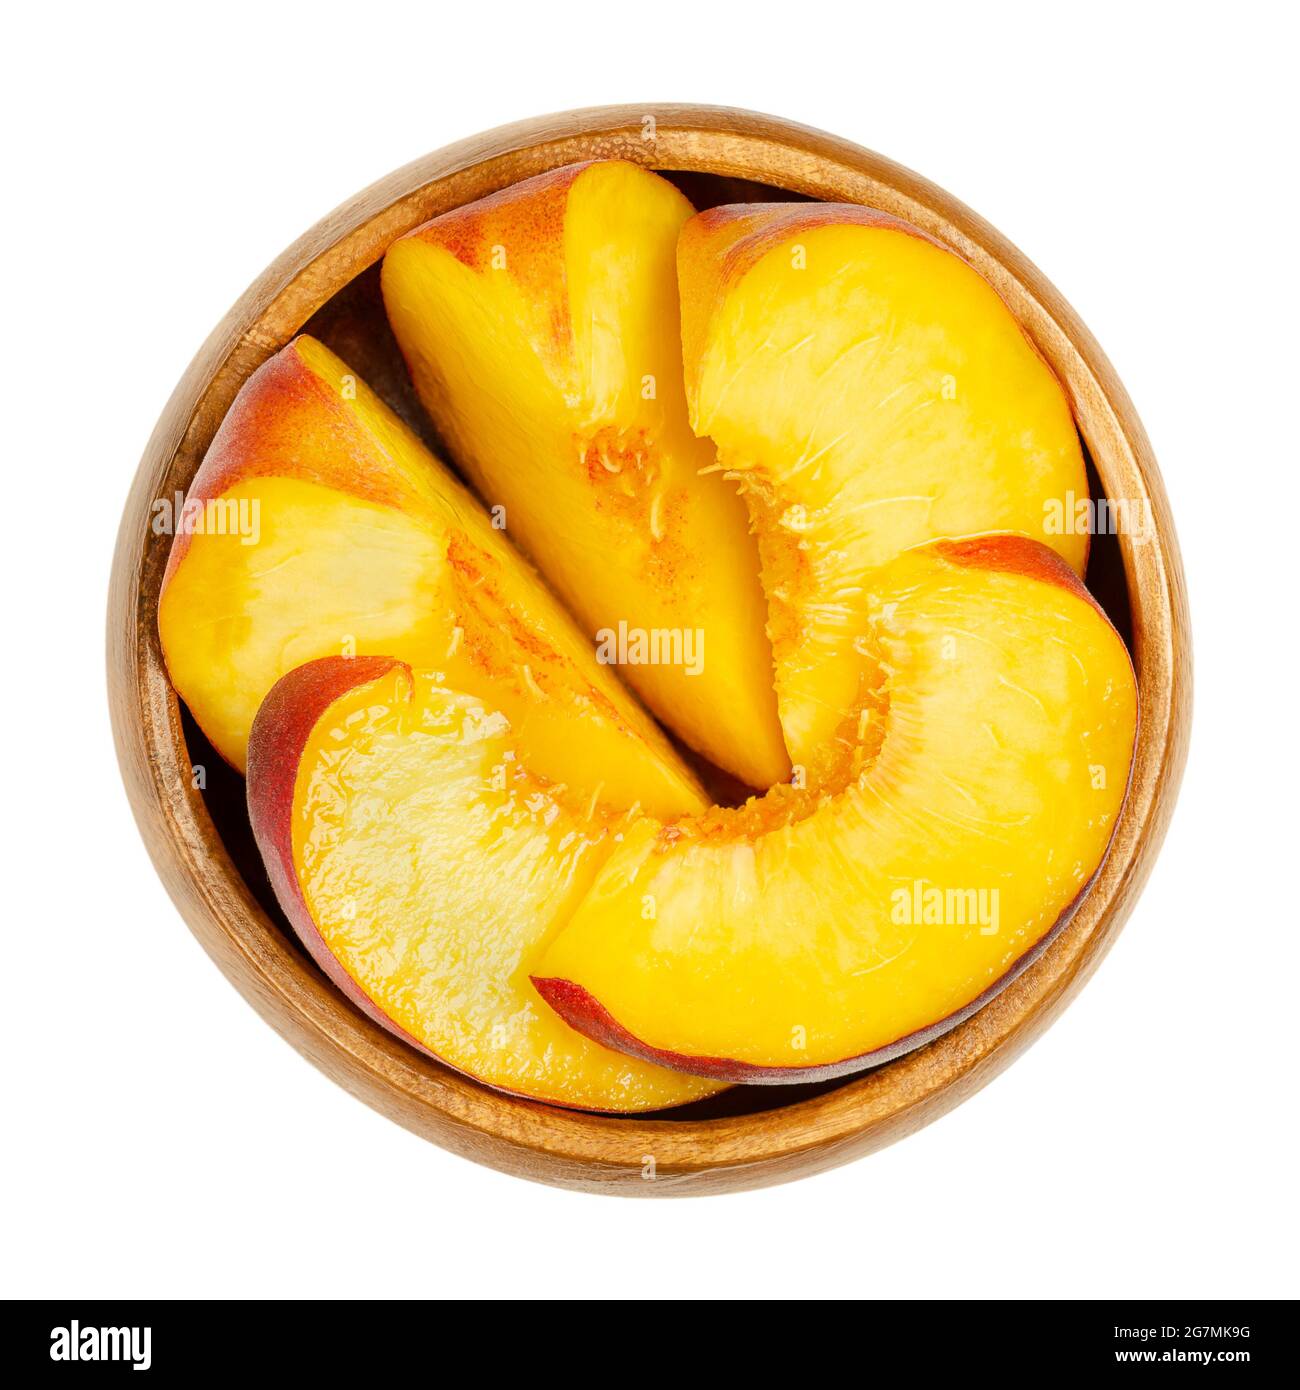 Peach slices in a wooden bowl. Sliced ripe fruit, with a yellow and juicy fruit flesh, and with velvety skin. Prunus persica. Ready to eat. Stock Photo